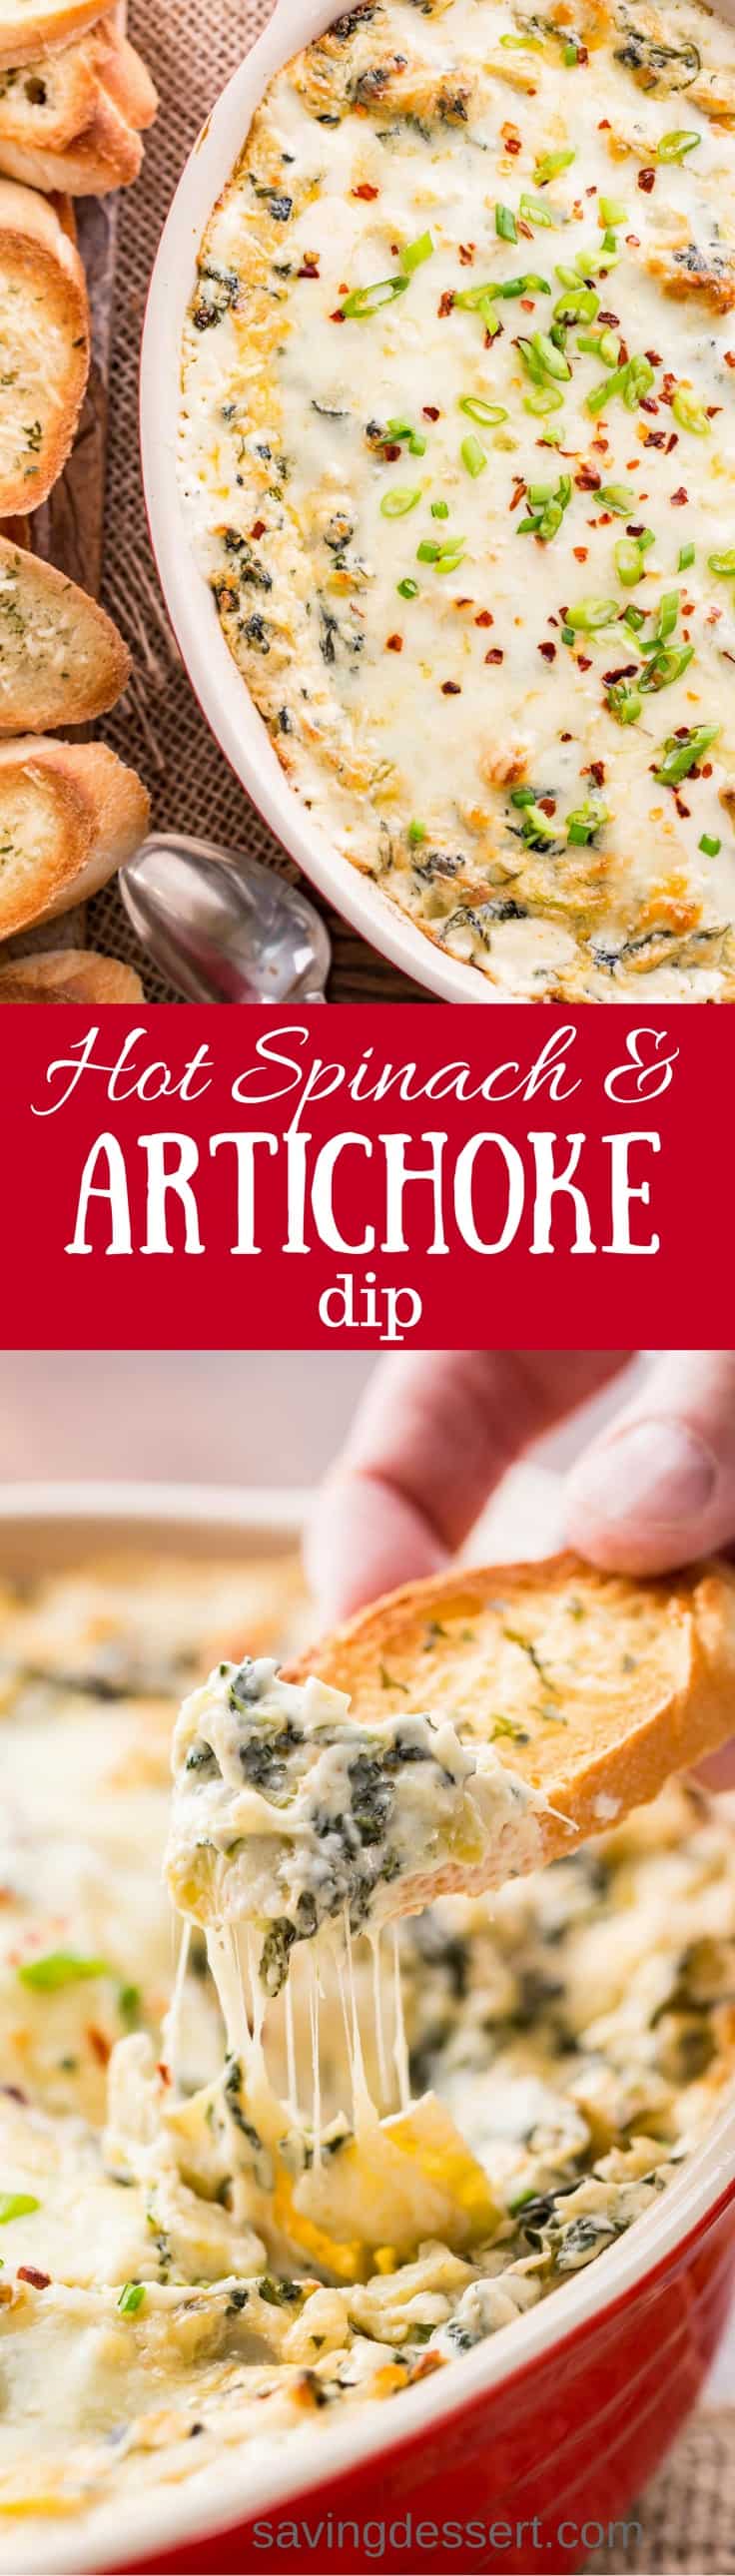 Hot Spinach and Artichoke Dip - Cheesy, creamy and loaded with chunks of artichoke hearts, earthy spinach, garlic and sweet onion. Serve with your favorite toasted baguette slices, crackers or chips for a memorable appetizer hearty enough to feed a hungry crowd - with easy make ahead directions too! #savingroomfordessert #spinachartichokedip #hotspinachdip #artichokedip #appetizer #hotappetizer #dip #hotdip